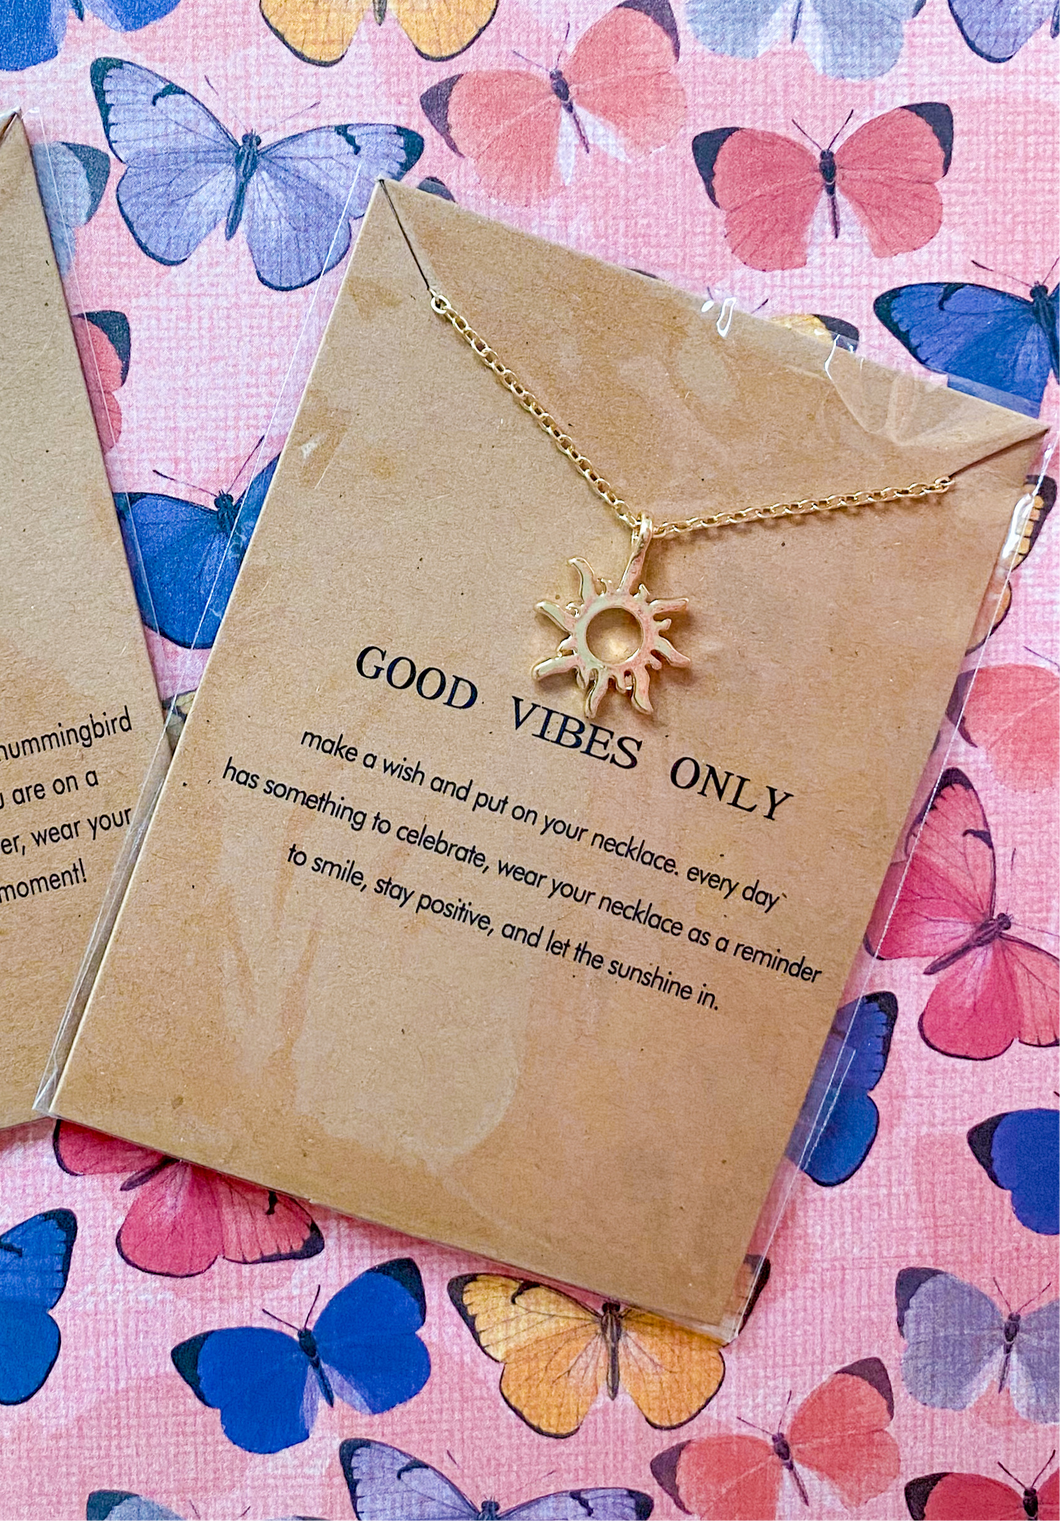 Good Vibes Only necklace